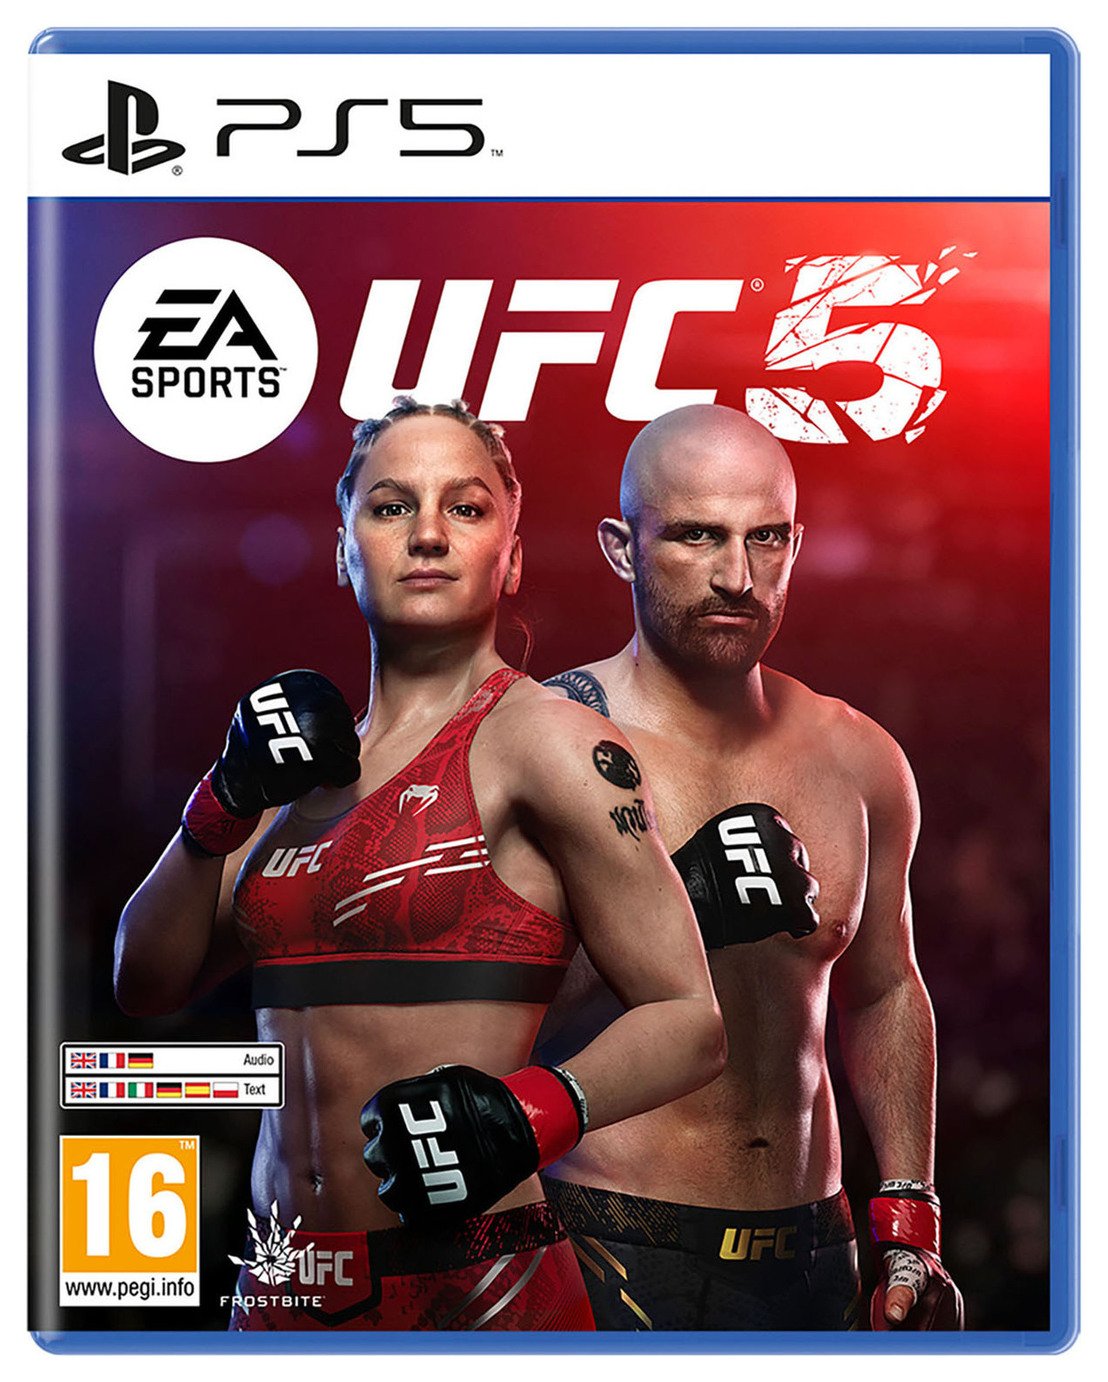 EA SPORTS UFC 5 PS5 Game